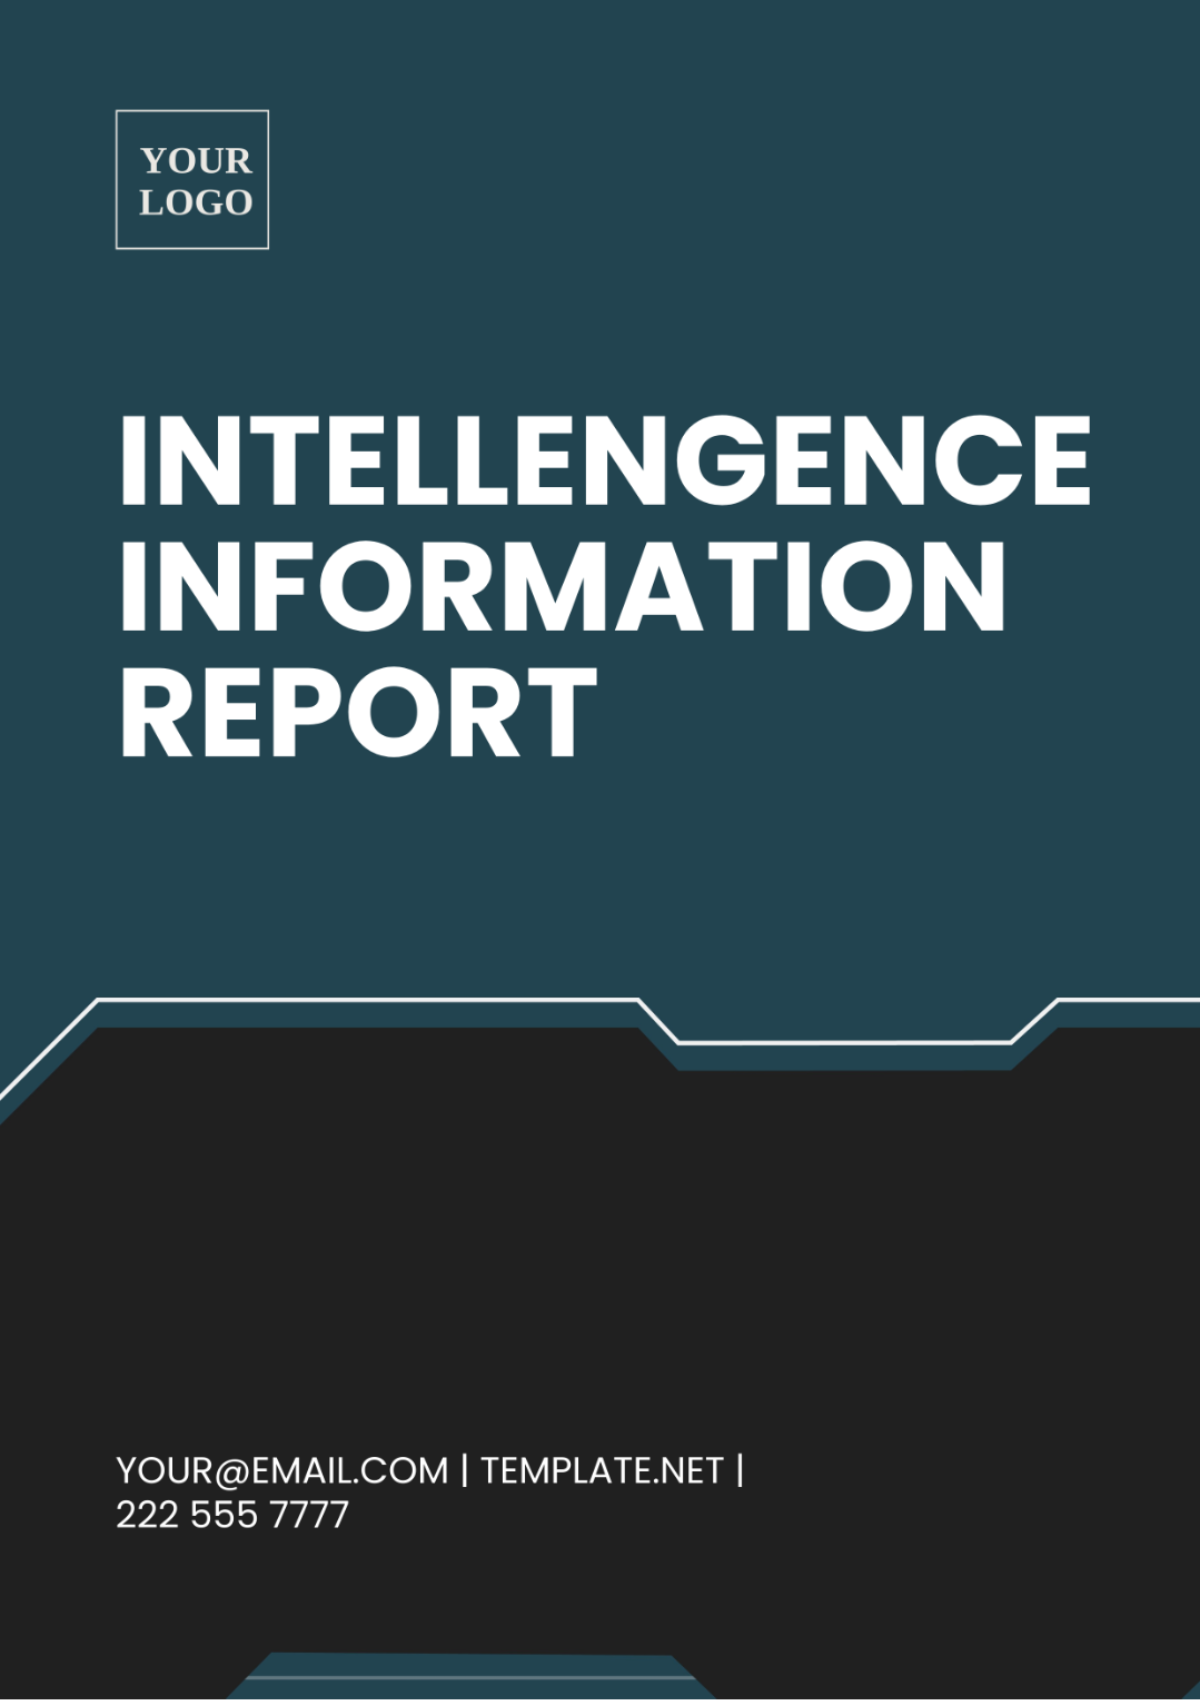 Intelligence Information Report Template